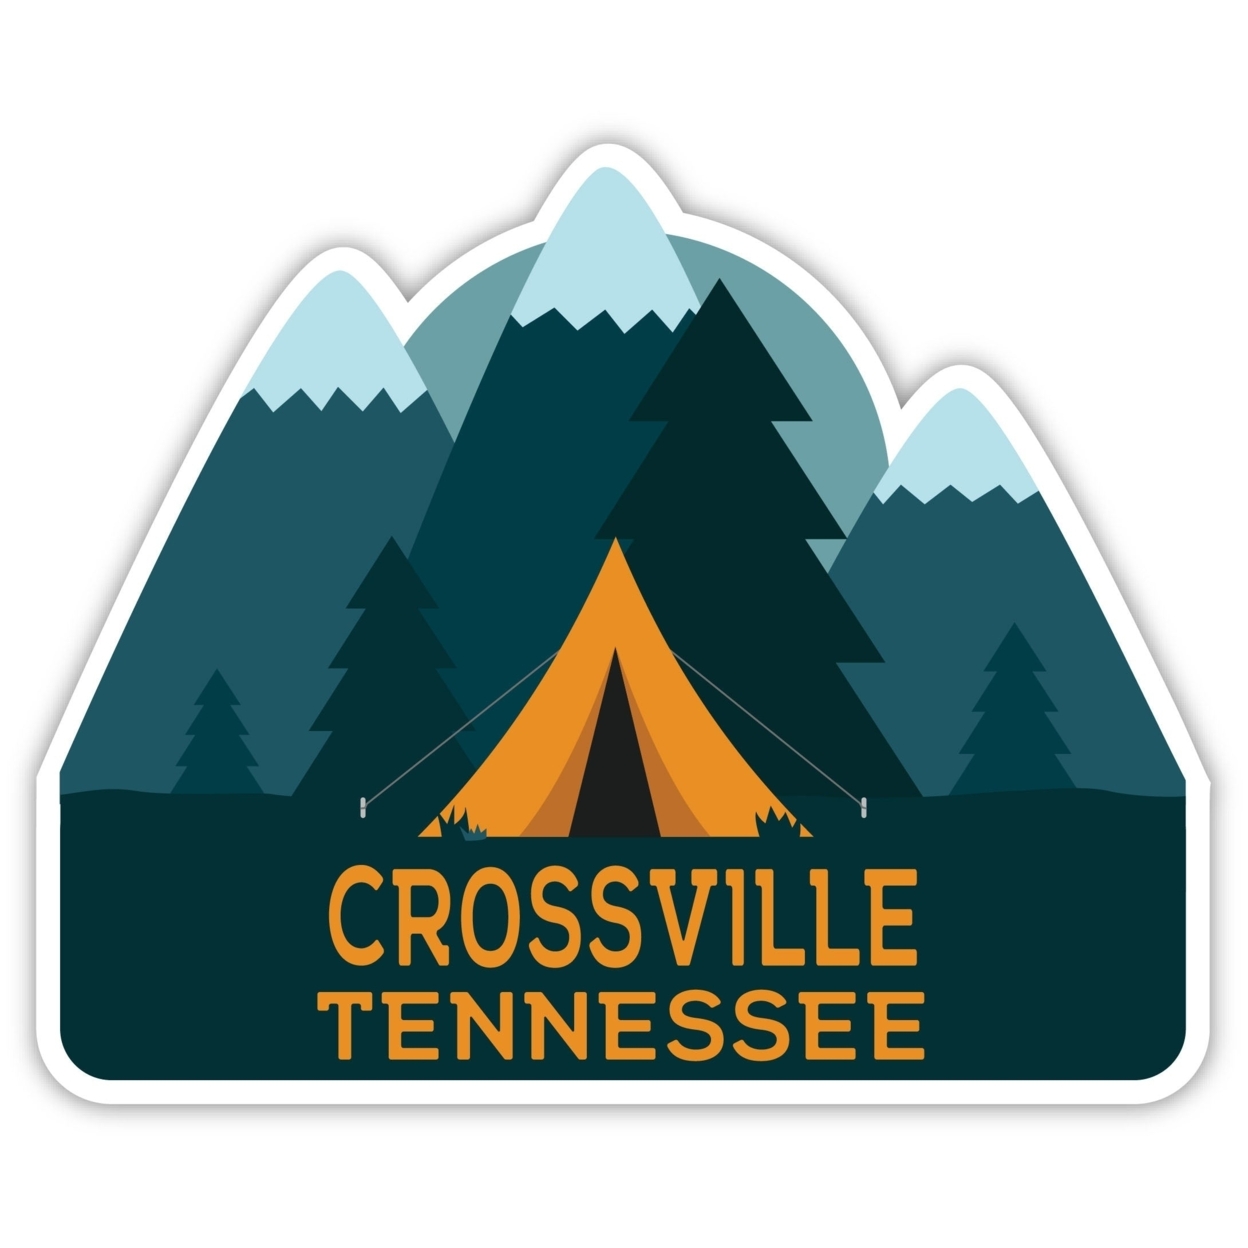 Crossville Tennessee Souvenir Decorative Stickers (Choose Theme And Size) - Single Unit, 6-Inch, Bear